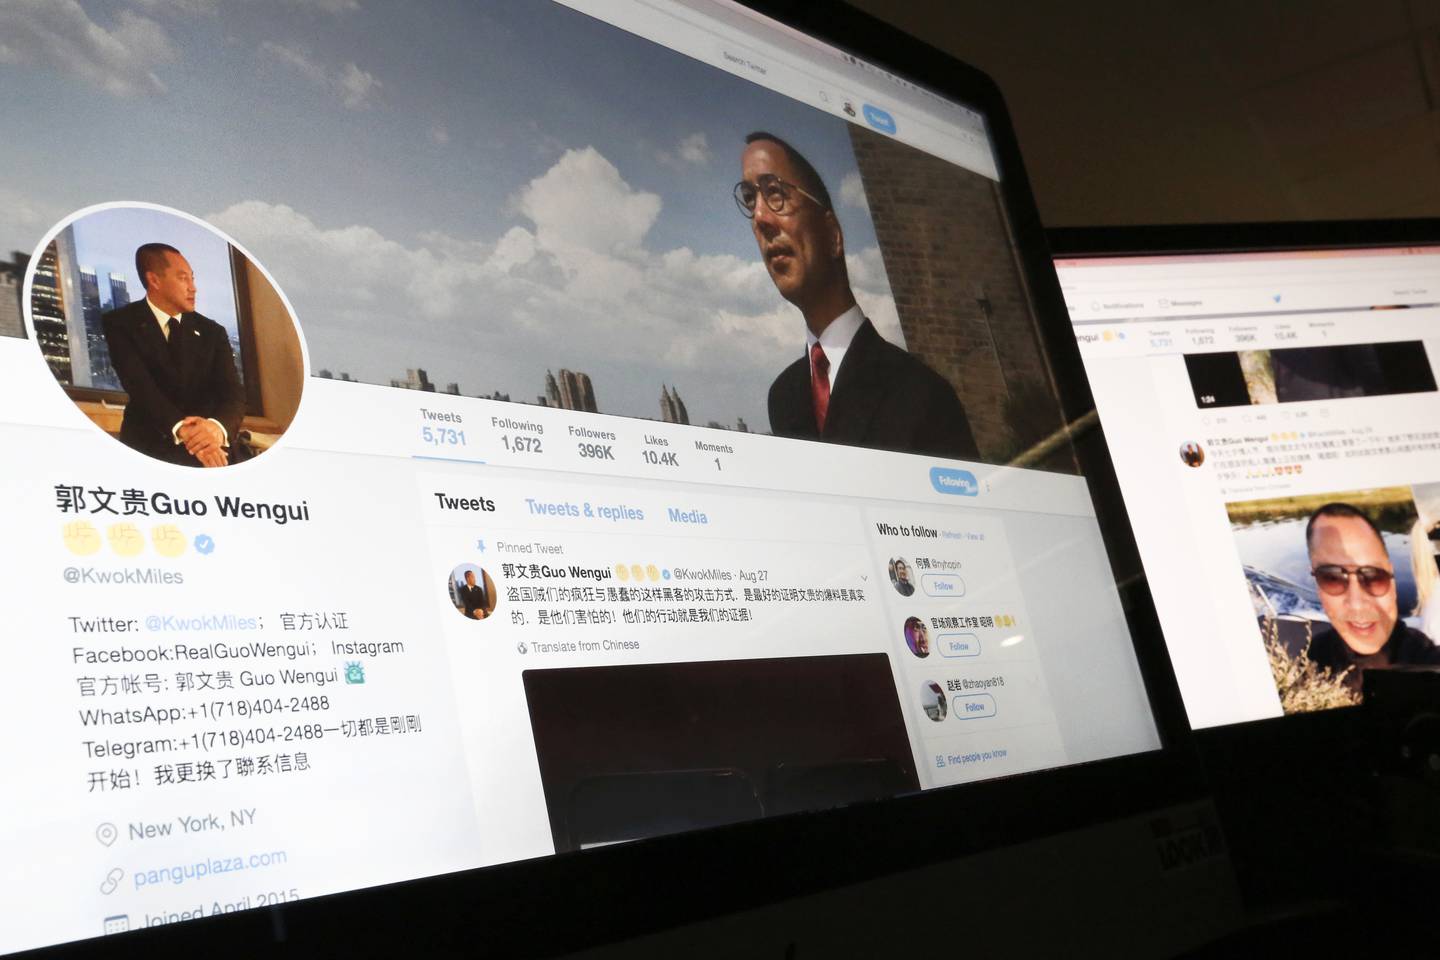 FILE - In this Aug. 30, 2017, file photo, a Twitter page of Chinese exiles businessman Guo Wengui is seen on a computer screen in Beijing.  Chinese real estate tycoon Guo, one of the ruling Communist PartyÄôs most wanted exiles, has applied for political asylum in the United States, his lawyer said Thursday, Sept. 7, in a move that could keep him out of BeijingÄôs grasp for at least several more years. (AP Photo/Andy Wong, File)